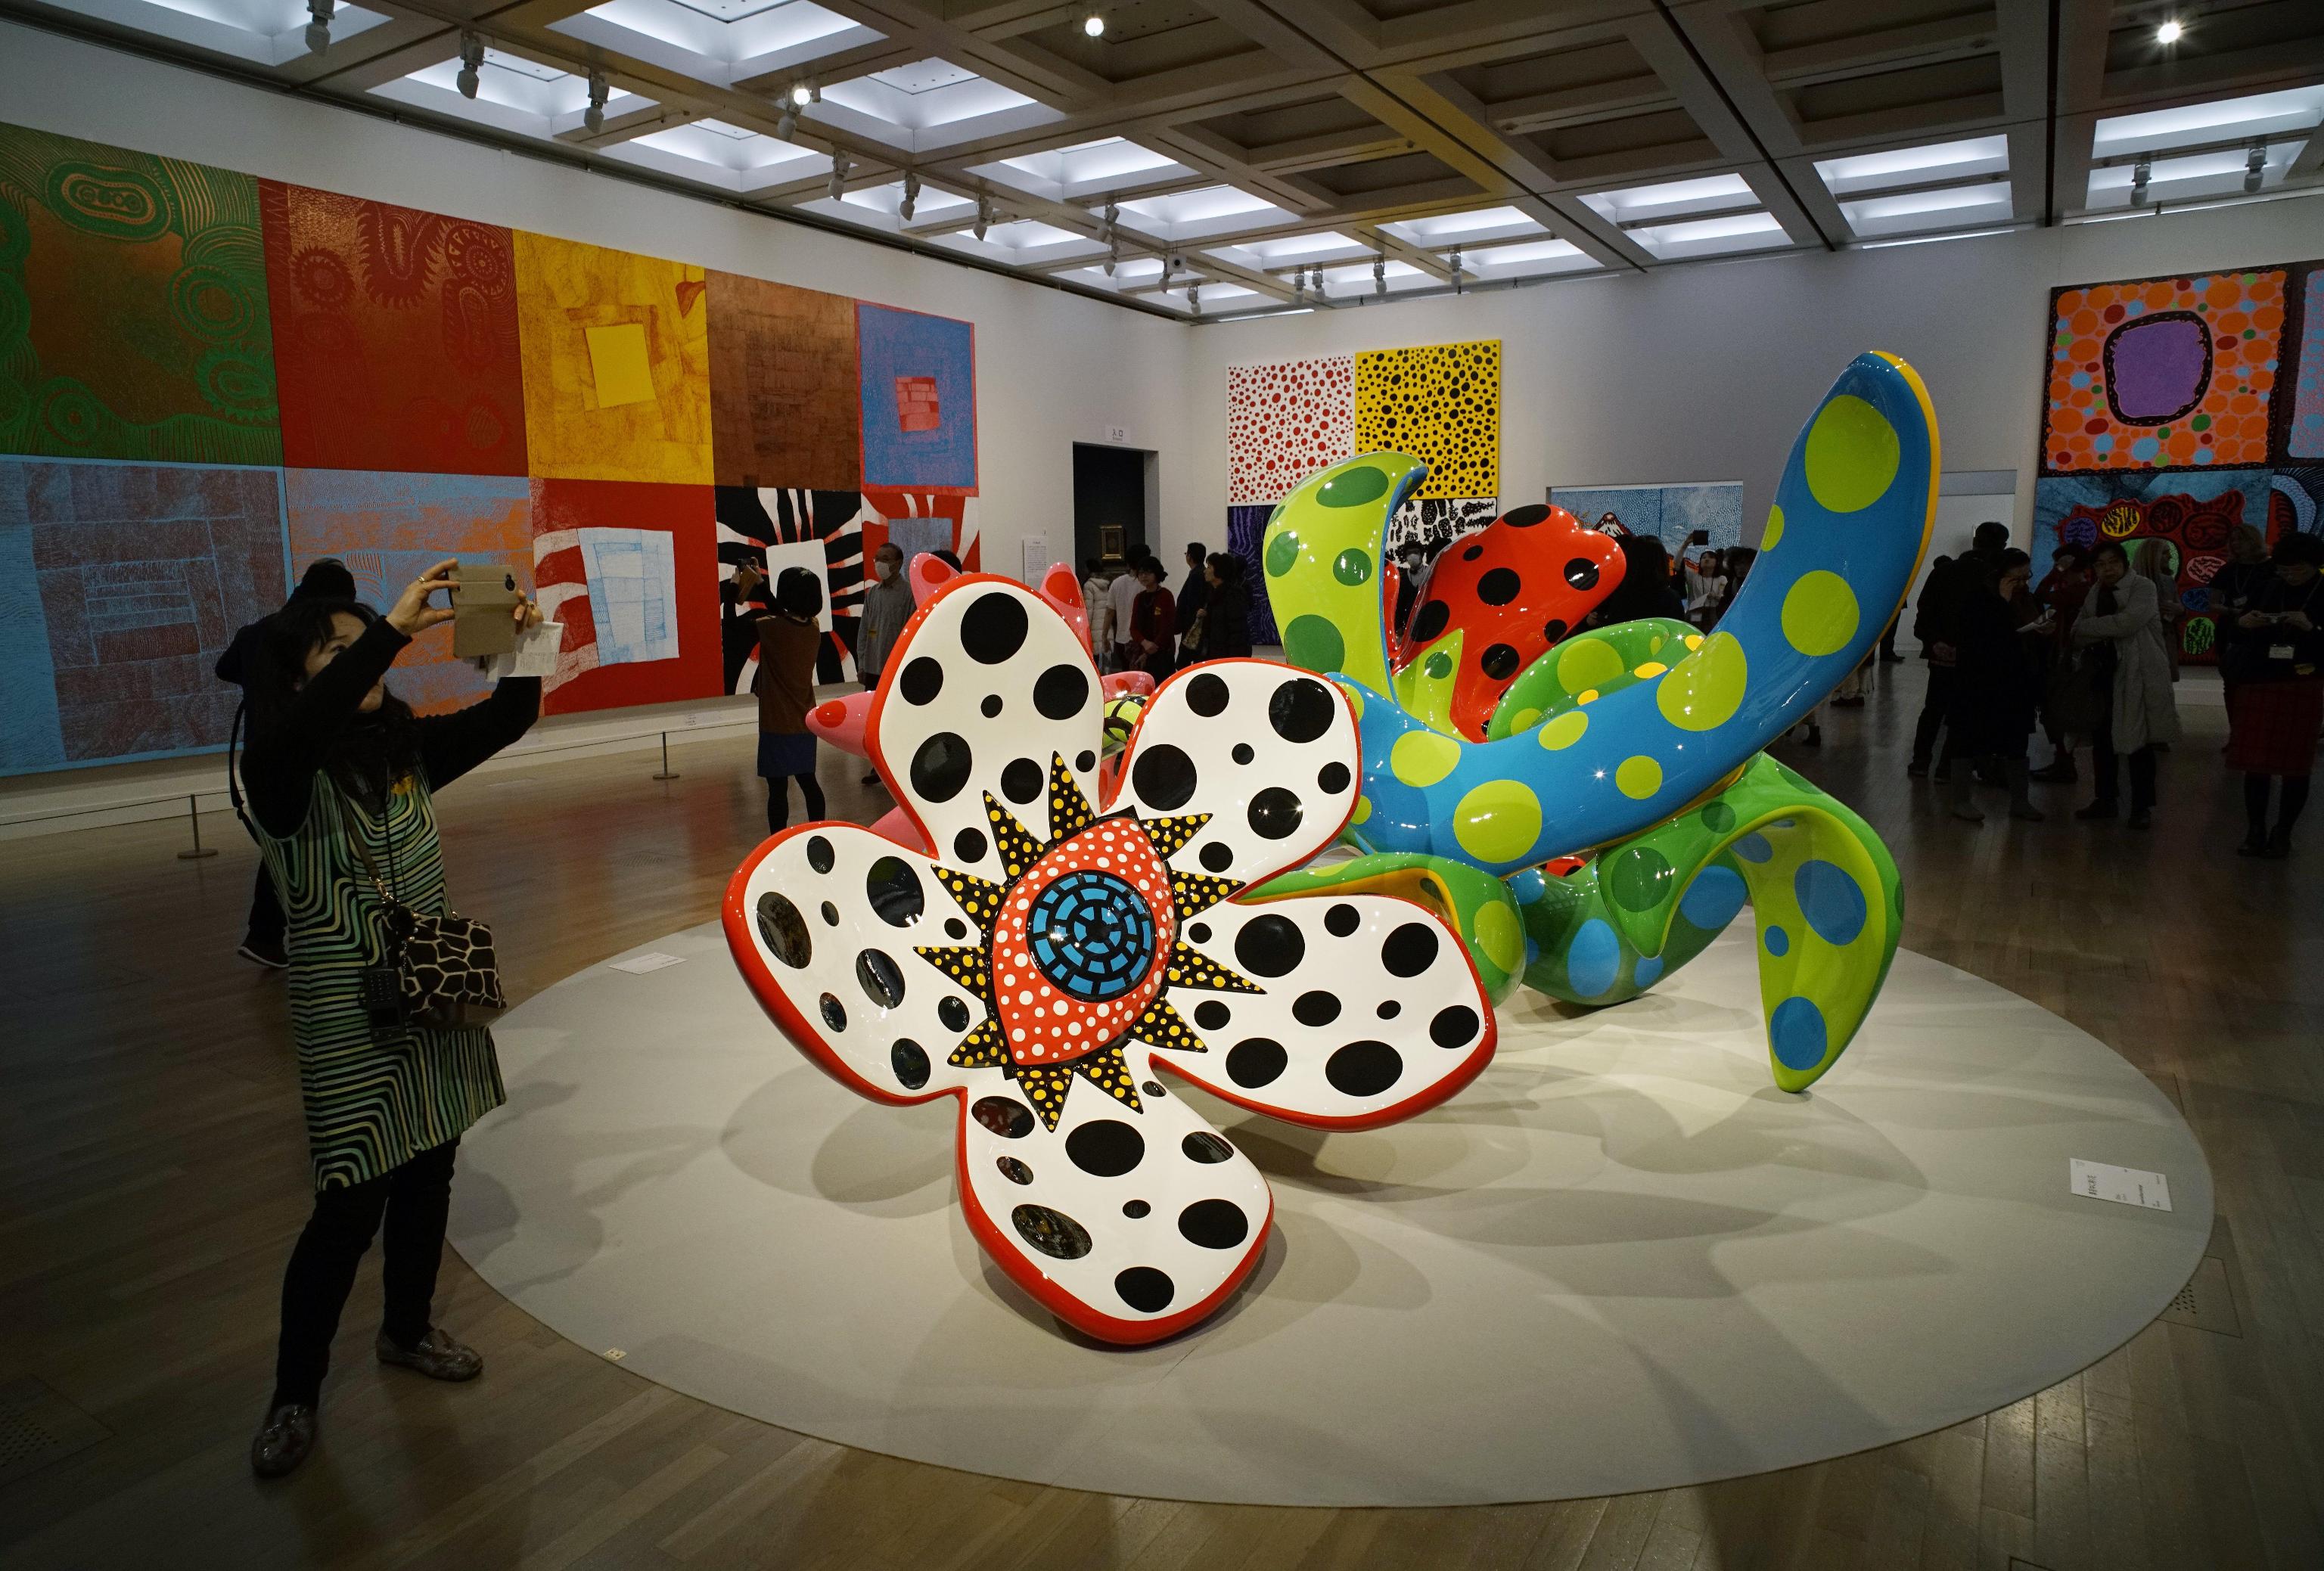 epa05806268 Visitors look at sculptures from the series 'Flowers that Bloom at Midnight' and 'Flowers that Bloom Tomorrow' by Japanese artist Yayoi Kusama during a media preview of the 'Yayoi Kusama: My Eternal Soul' exhibition at the National Art Center in Tokyo, Japan, 21 February 2017. The exhibition presents early and recent works by the 87-year-old artist and will be open to the public from 22 February to 22 May 2017.  EPA/FRANCK ROBICHON   EDITORIAL USE ONLY